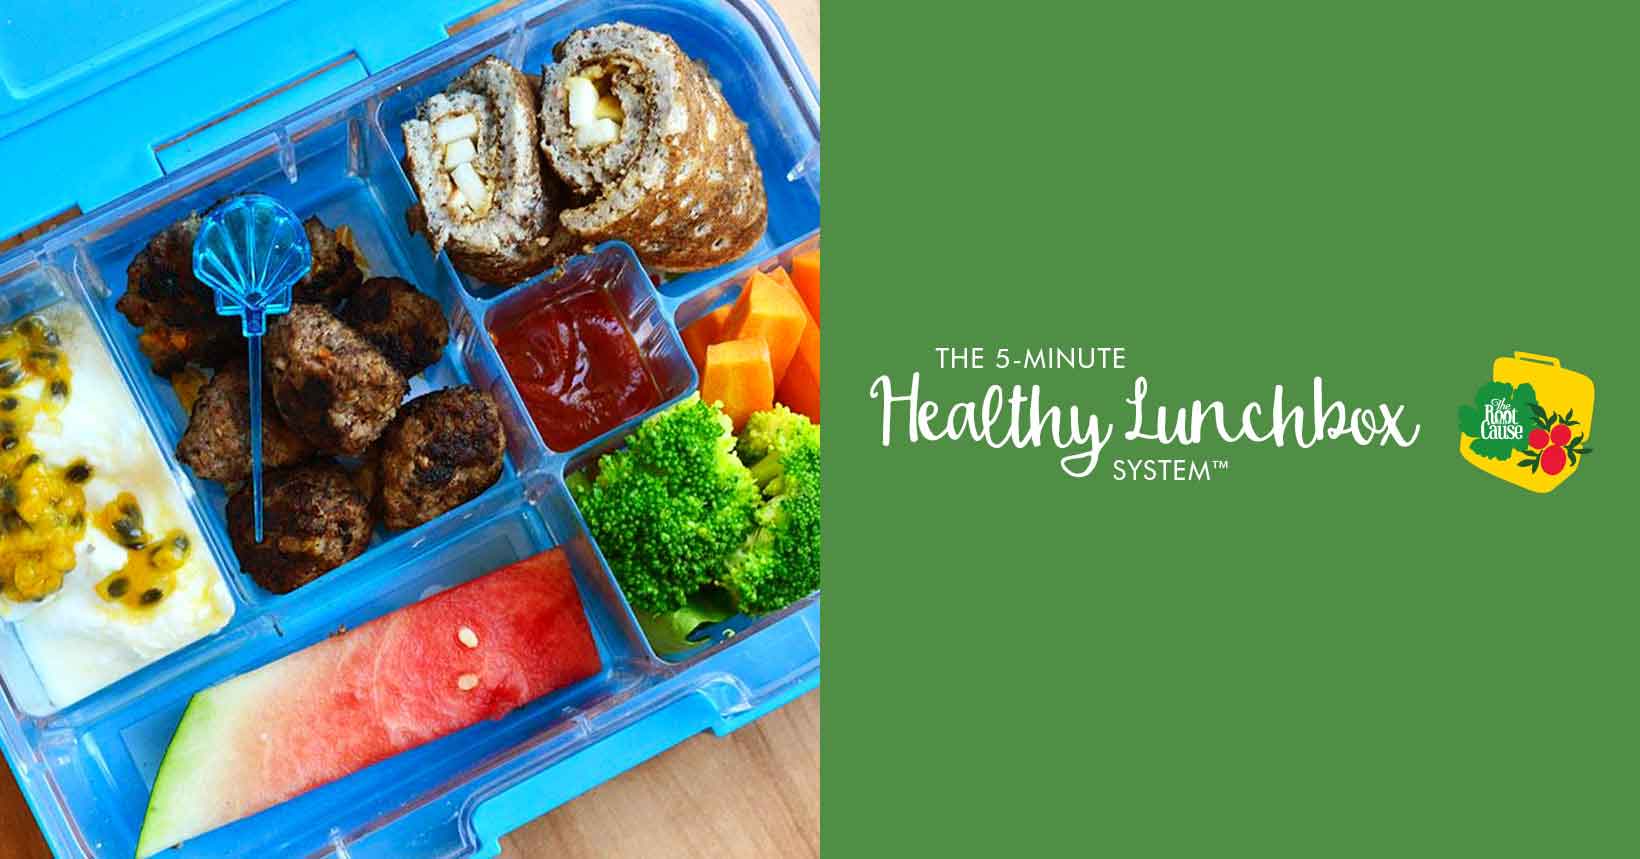 5 Minute Healthy Lunchbox System - The Root Cause